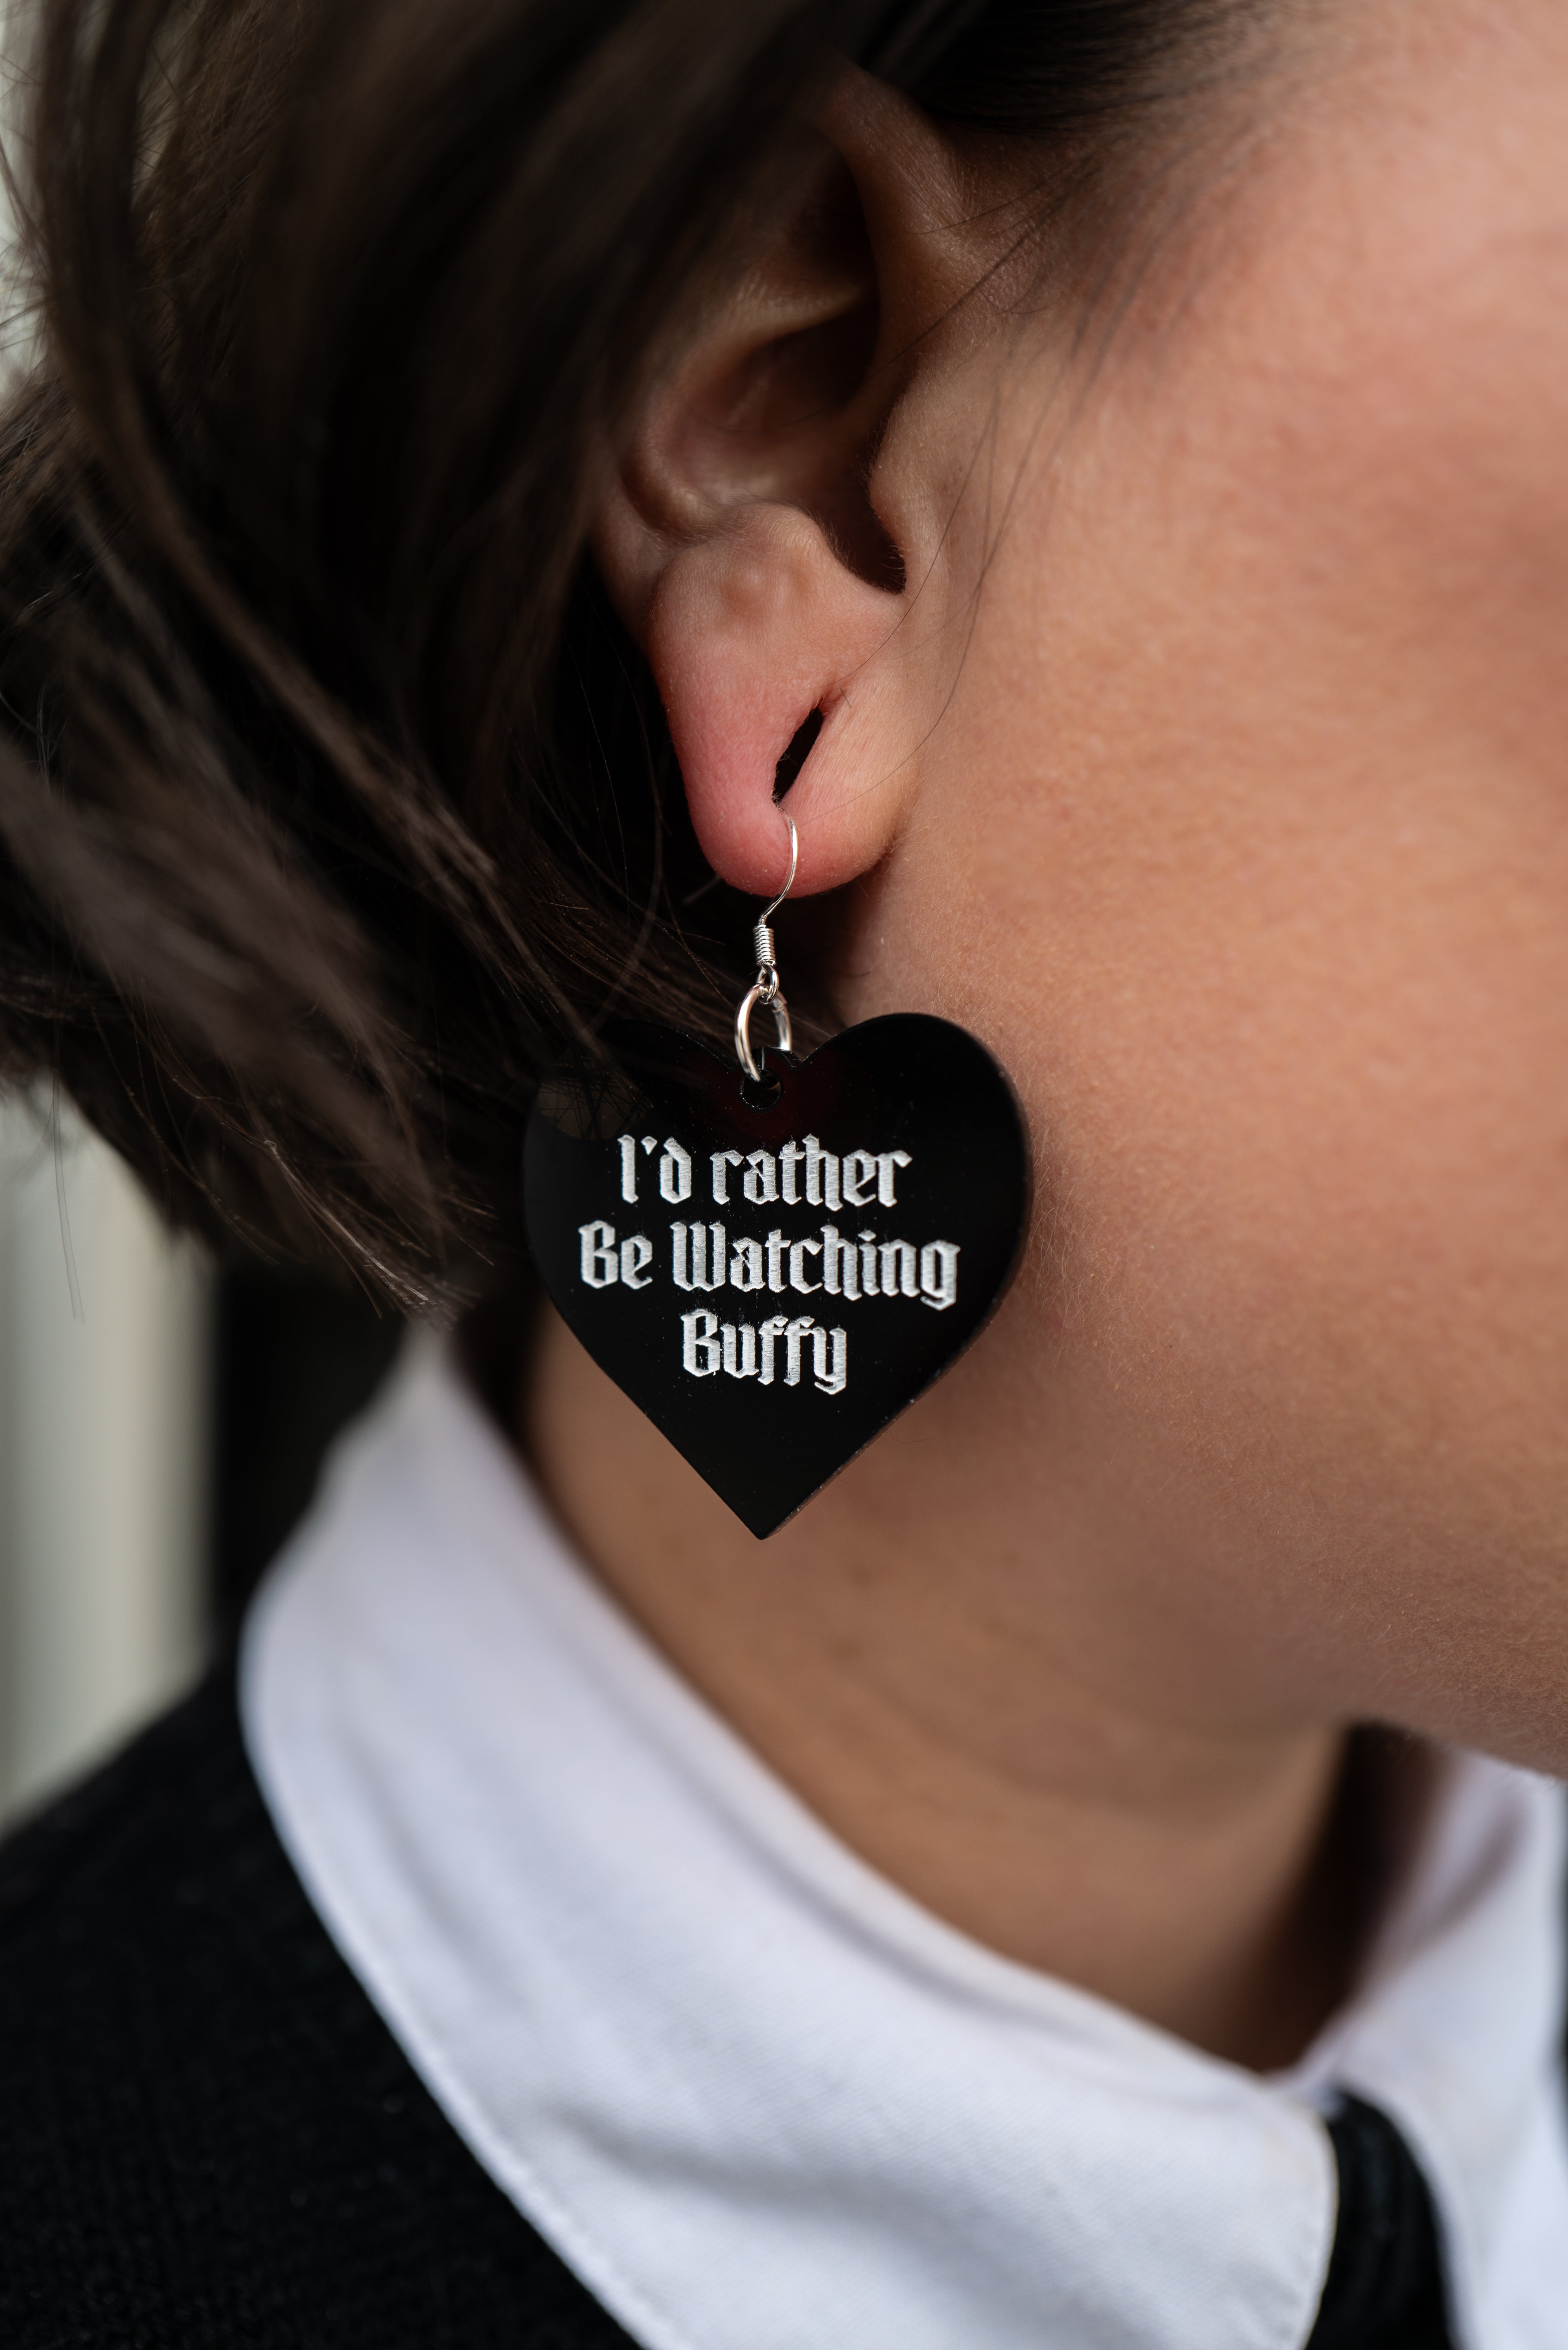 I'd Rather Be Watching Buffy Black Heart Earrings